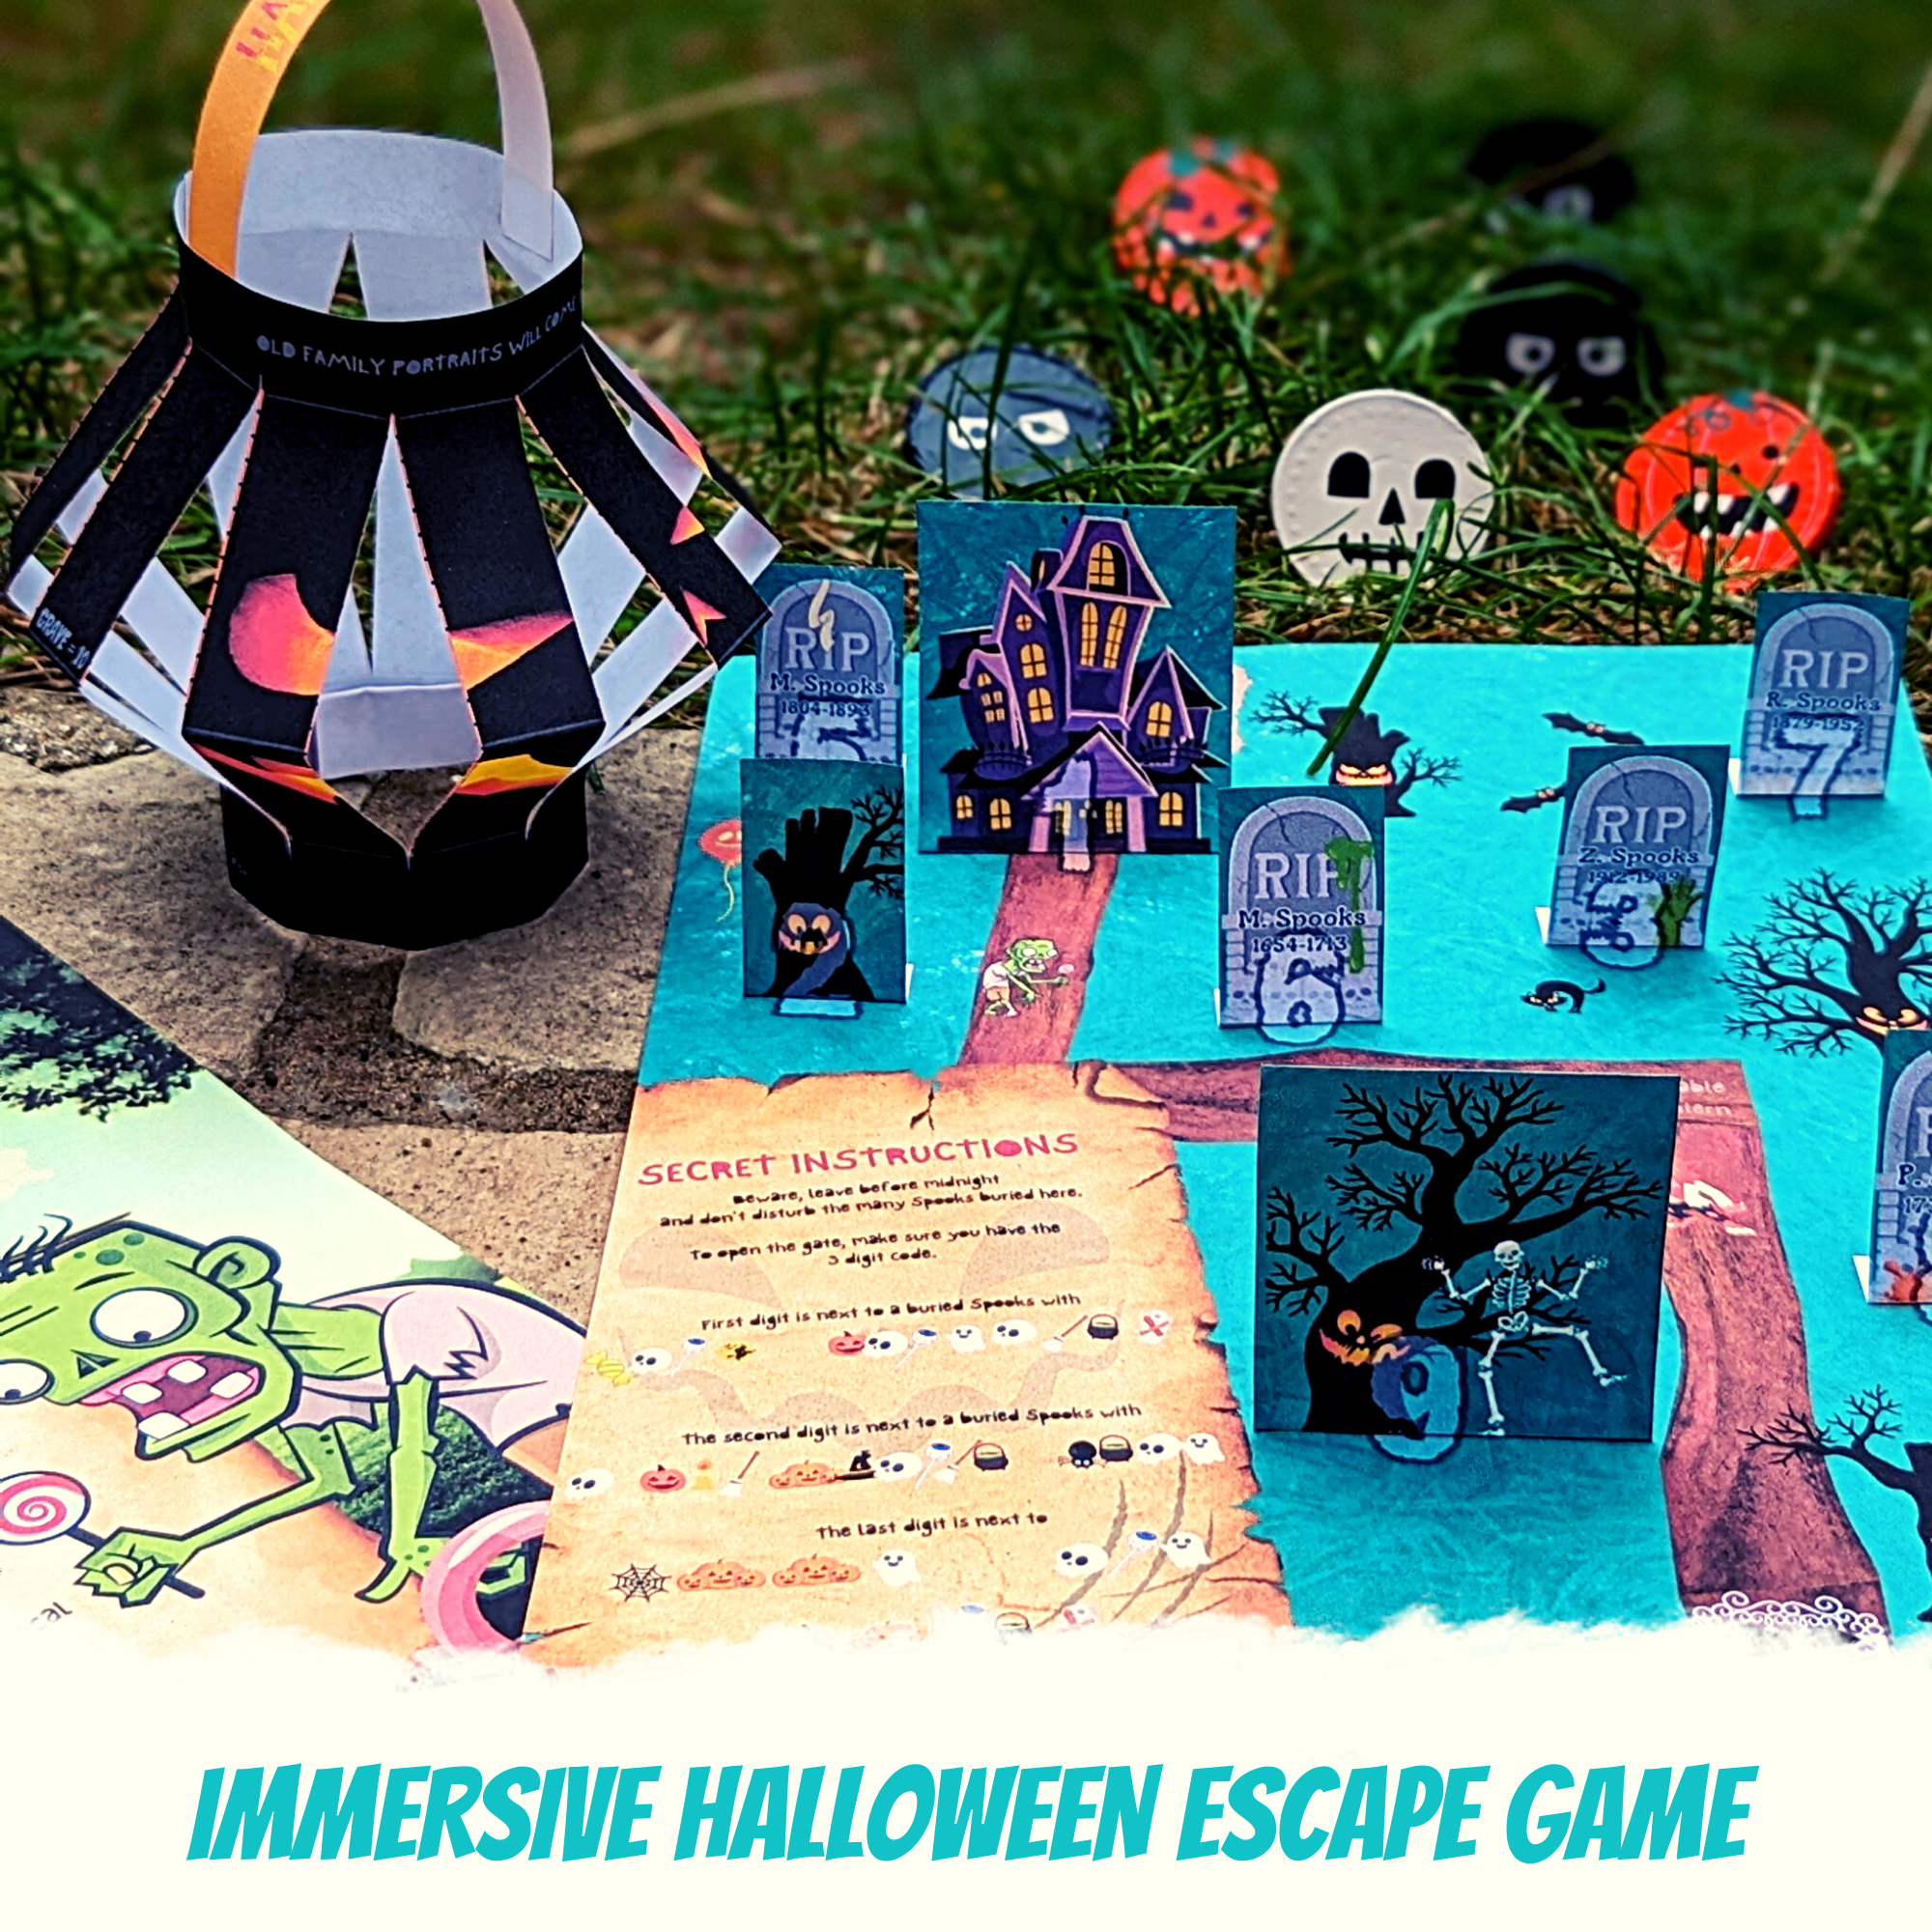 Escape Room Game kit for kids perfect for children birthday parties : Great Halloween Escape. Home family spooky trick or treat activity - cemetery puzzle